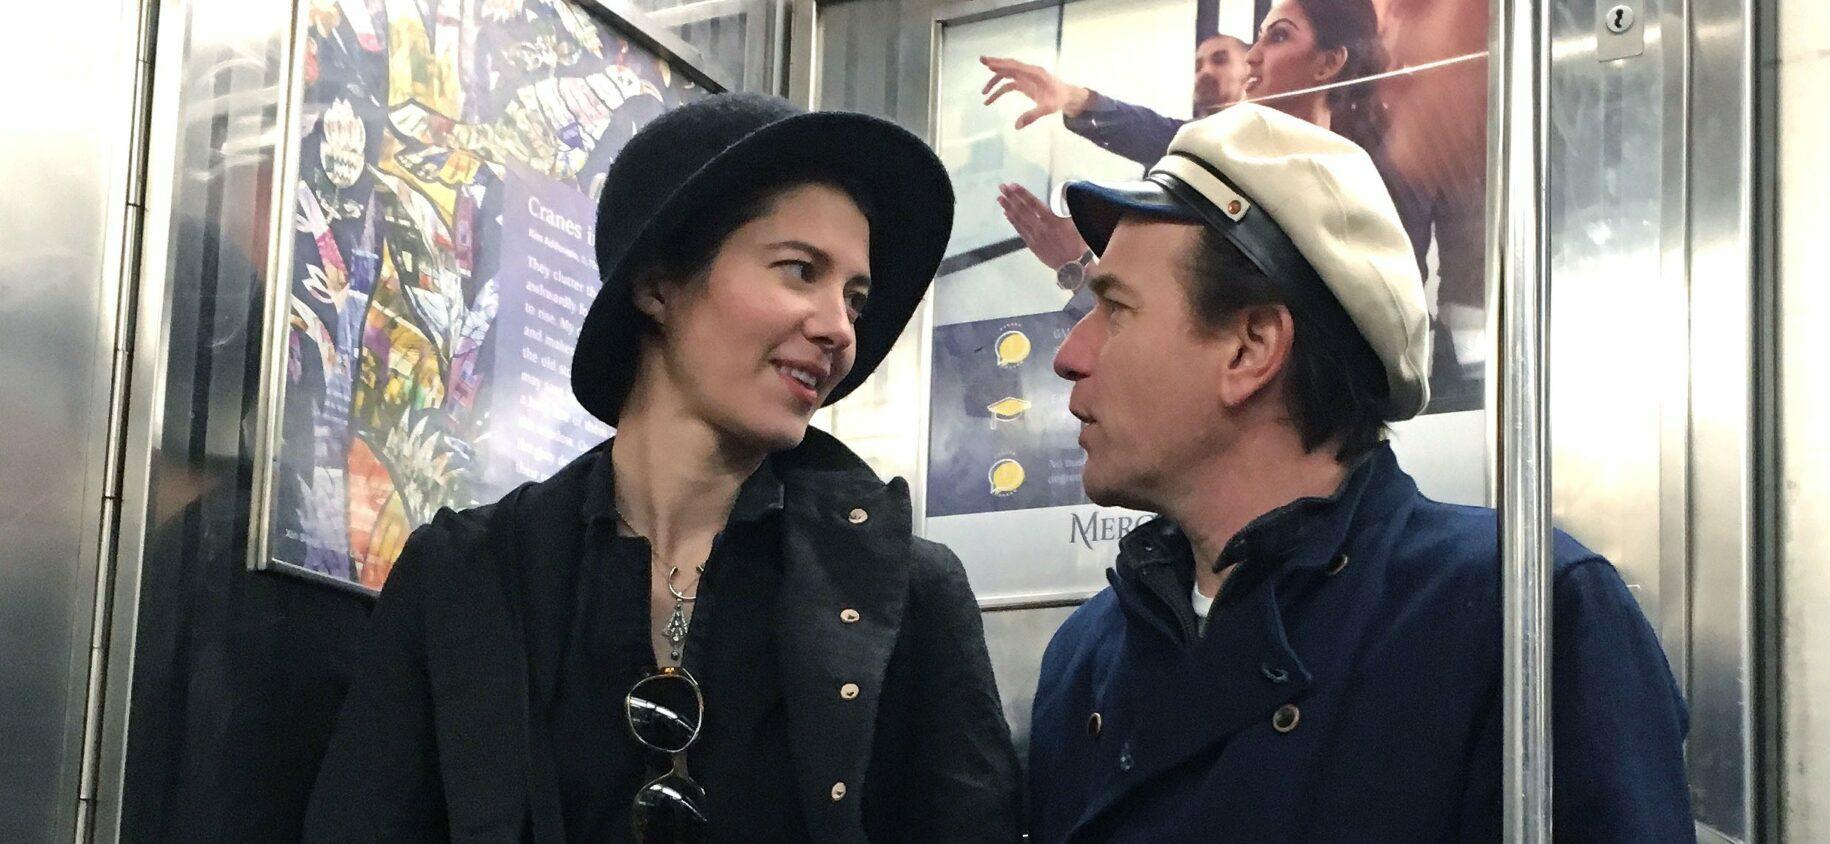 Ewan McGregor and girlfriend Mary Elizabeth Winstead kiss and hold hands while riding the Subway in NYC